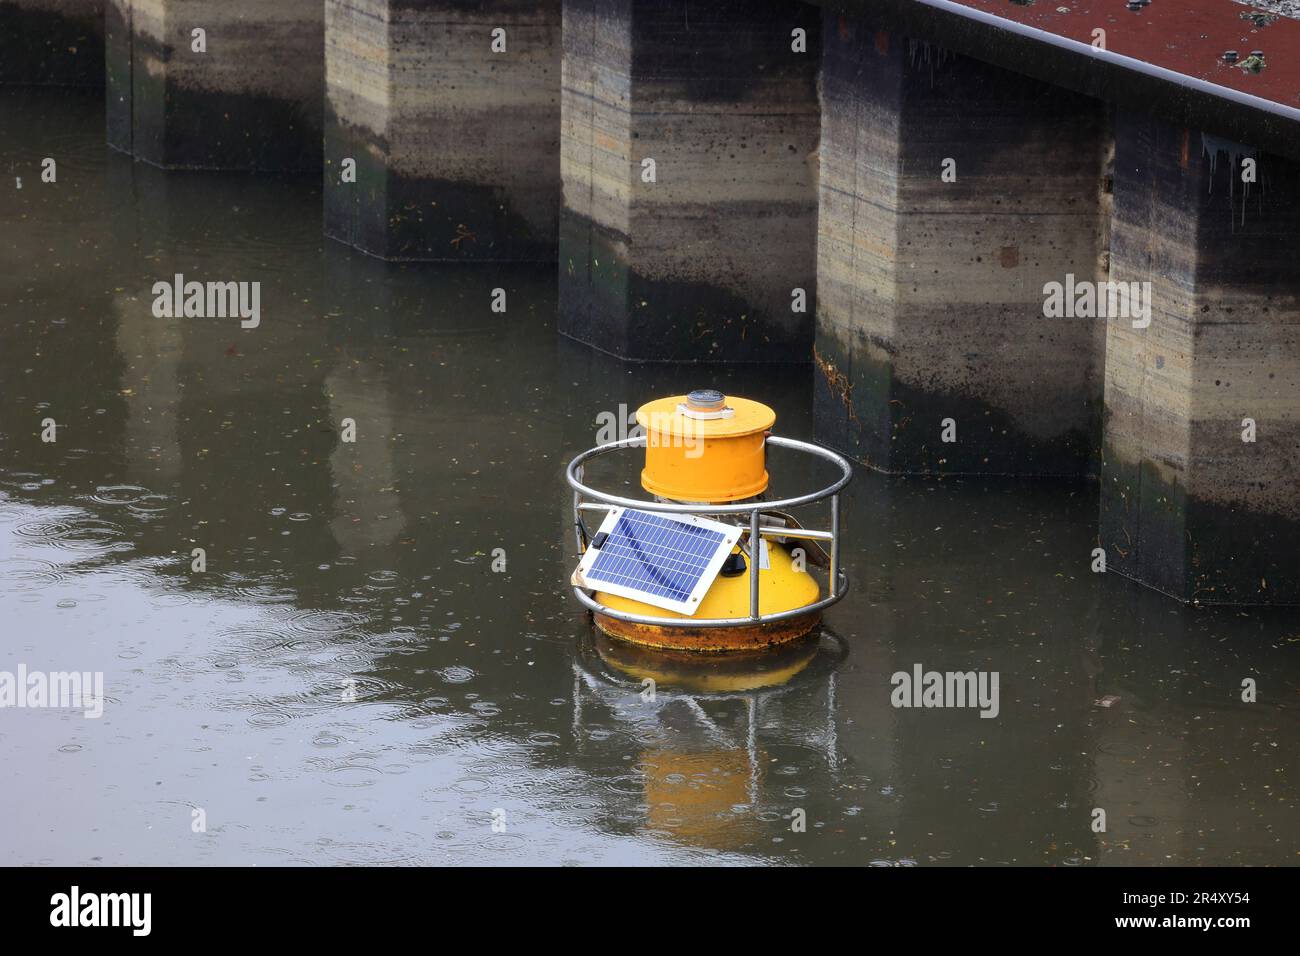 A YSI brand solar powered water quality monitoring buoy with remote telemetry in the Gowanus Canal, Brooklyn, New York. Stock Photo